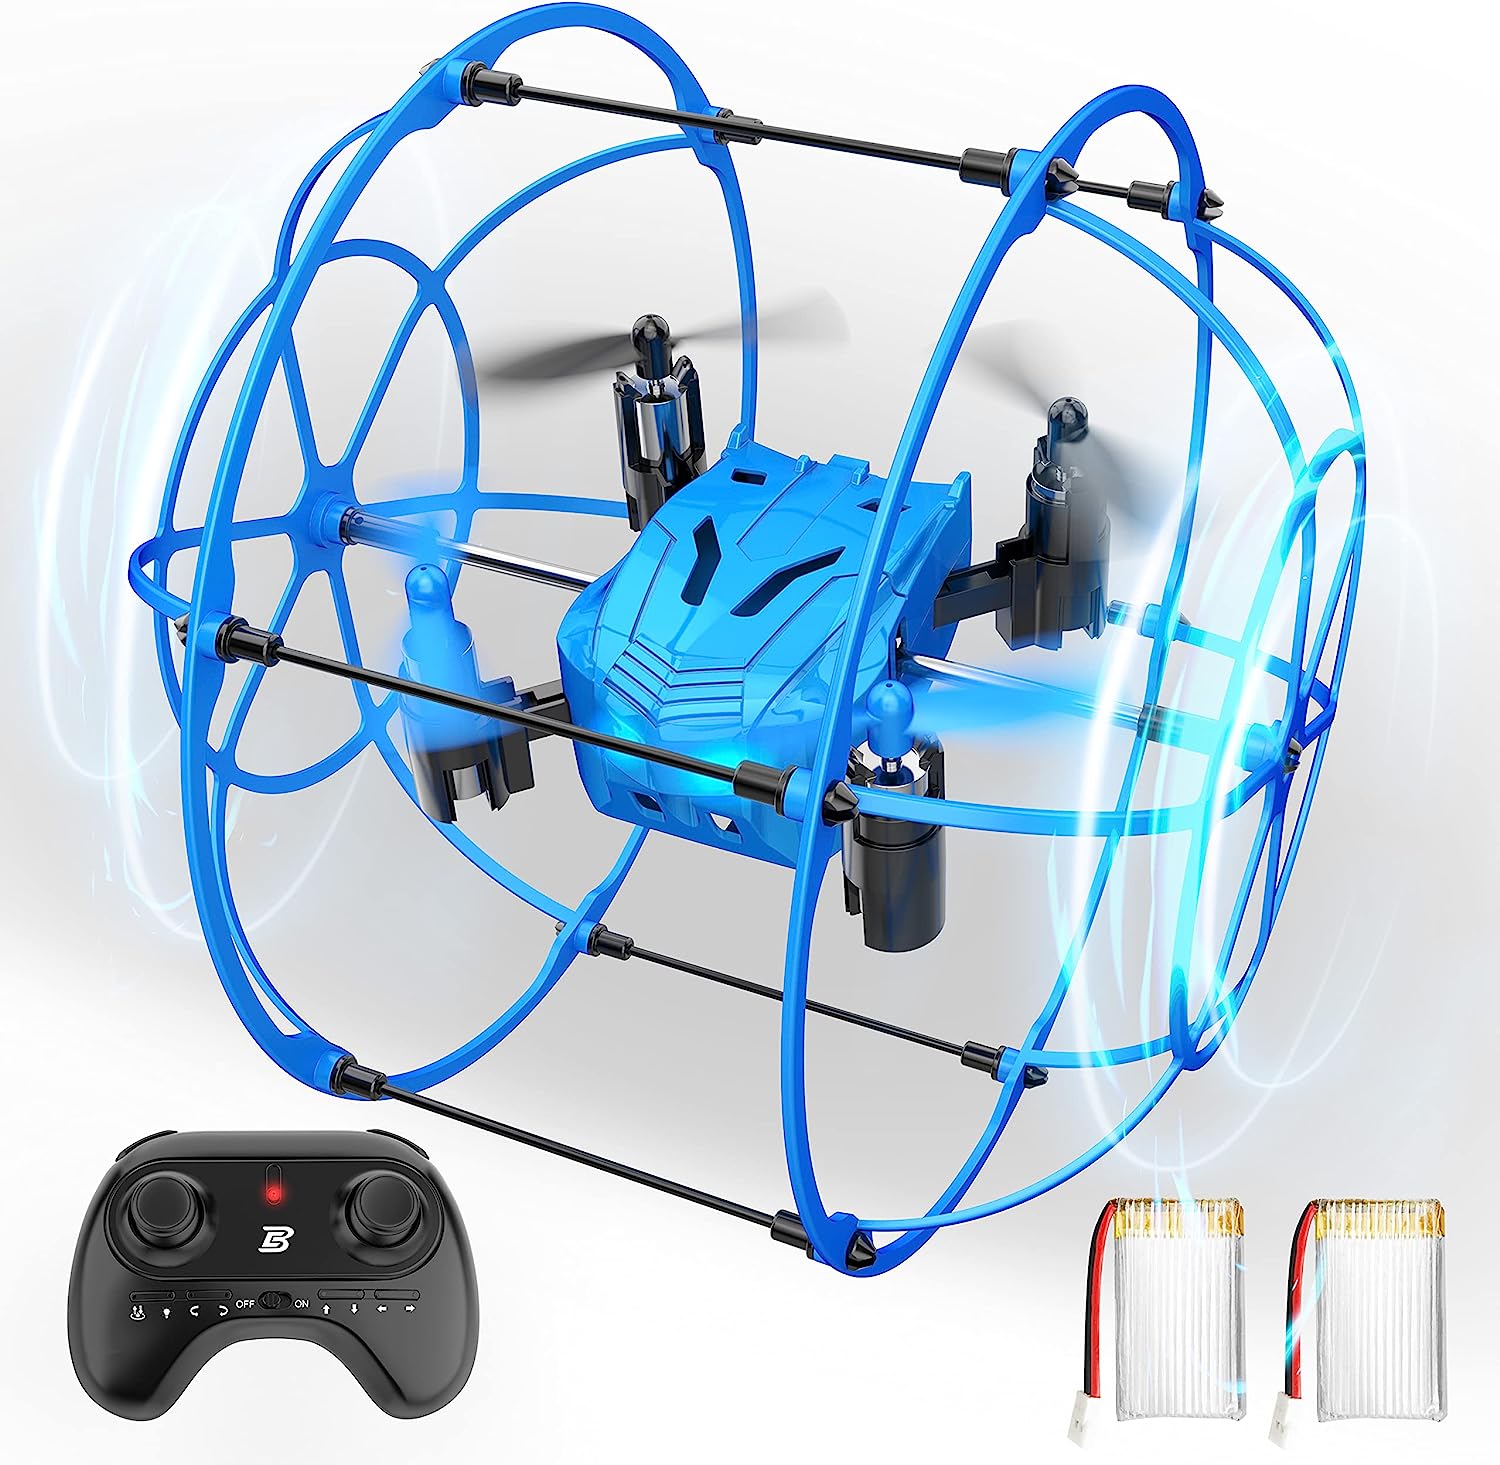 BEZGAR HQ053 Remote Control Mini Drone for Kids - Remote Control Spherical Rolling Quadcopter 360 Degree Flip Christmas Birthday Gift Indoor Outdoor Toys for Boys Age 4 5 6 7 8-12 RC Drone Beginner